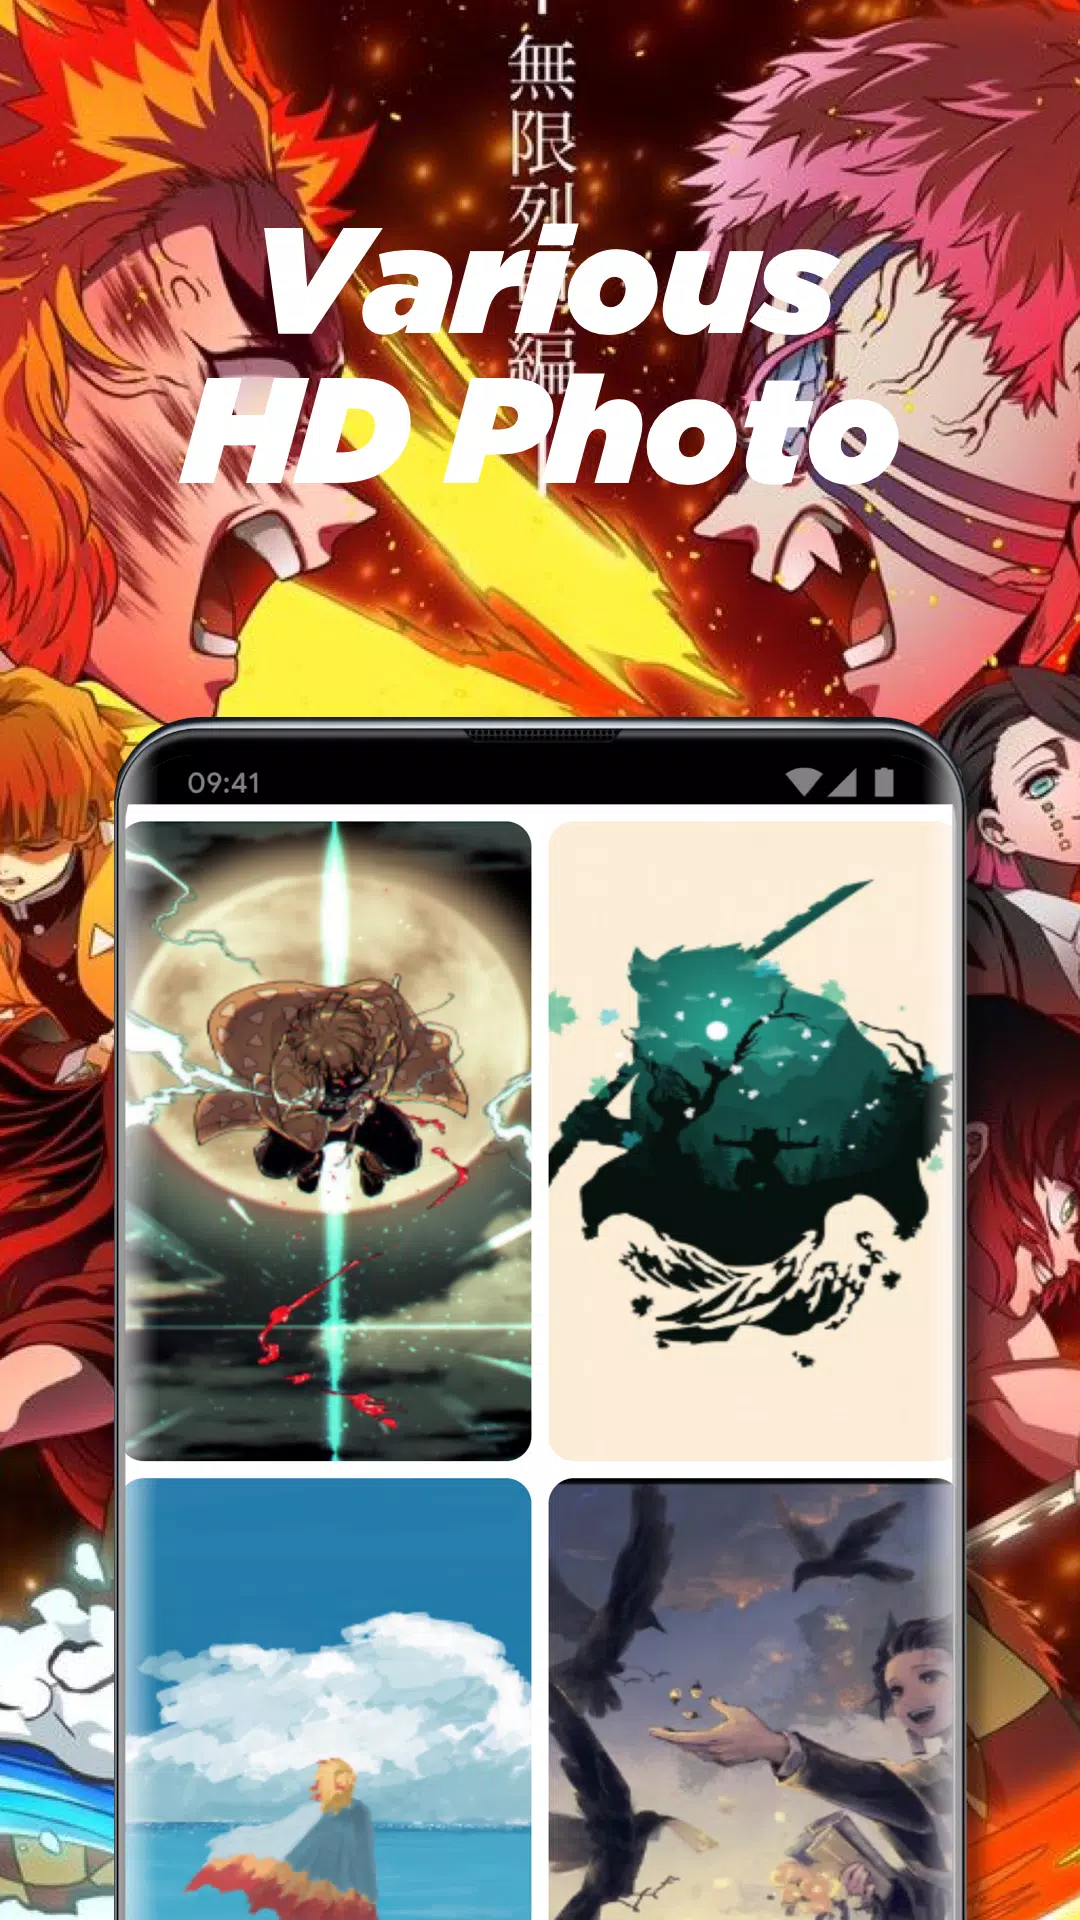 Wallpapers for Demon Slayer on the App Store